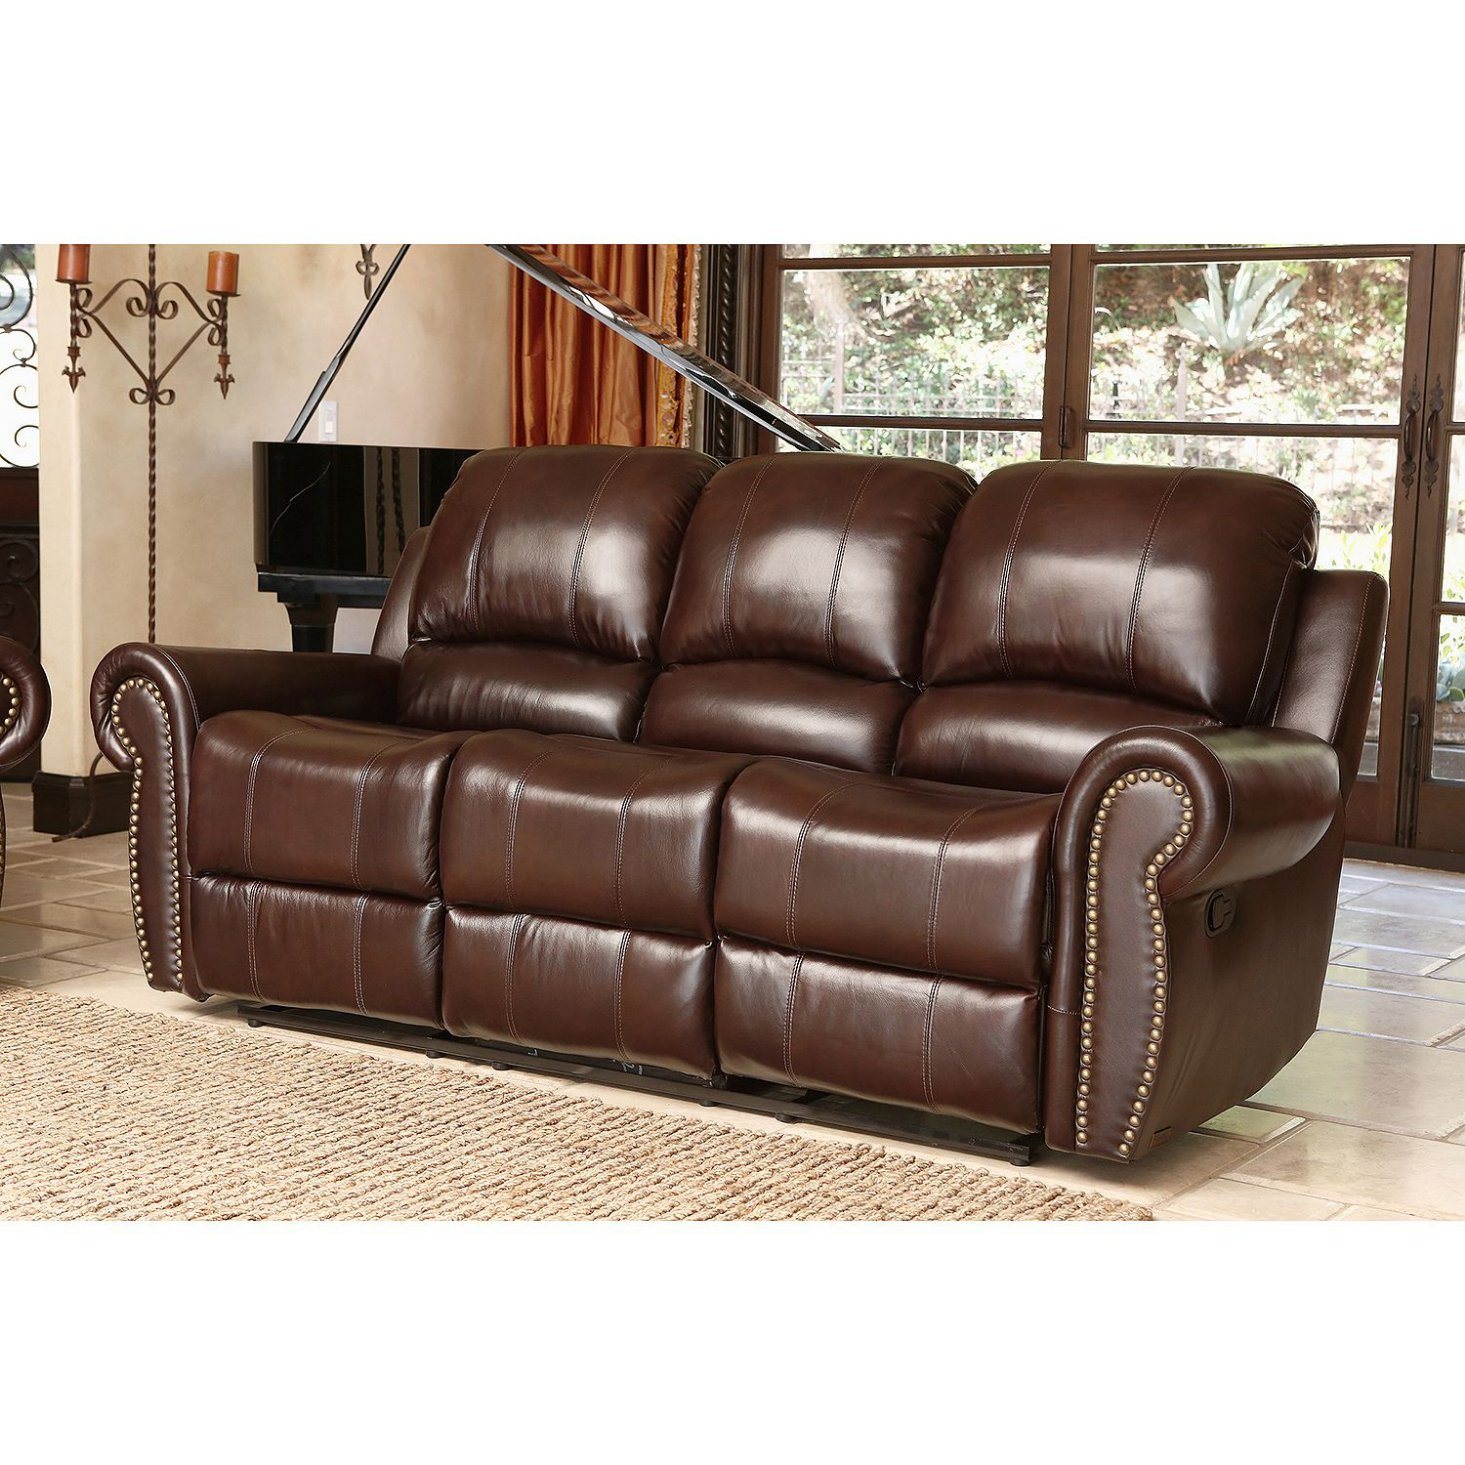 Home Theater Manual Nailhead Trim Reclining Sofa with Top-Grain Leather